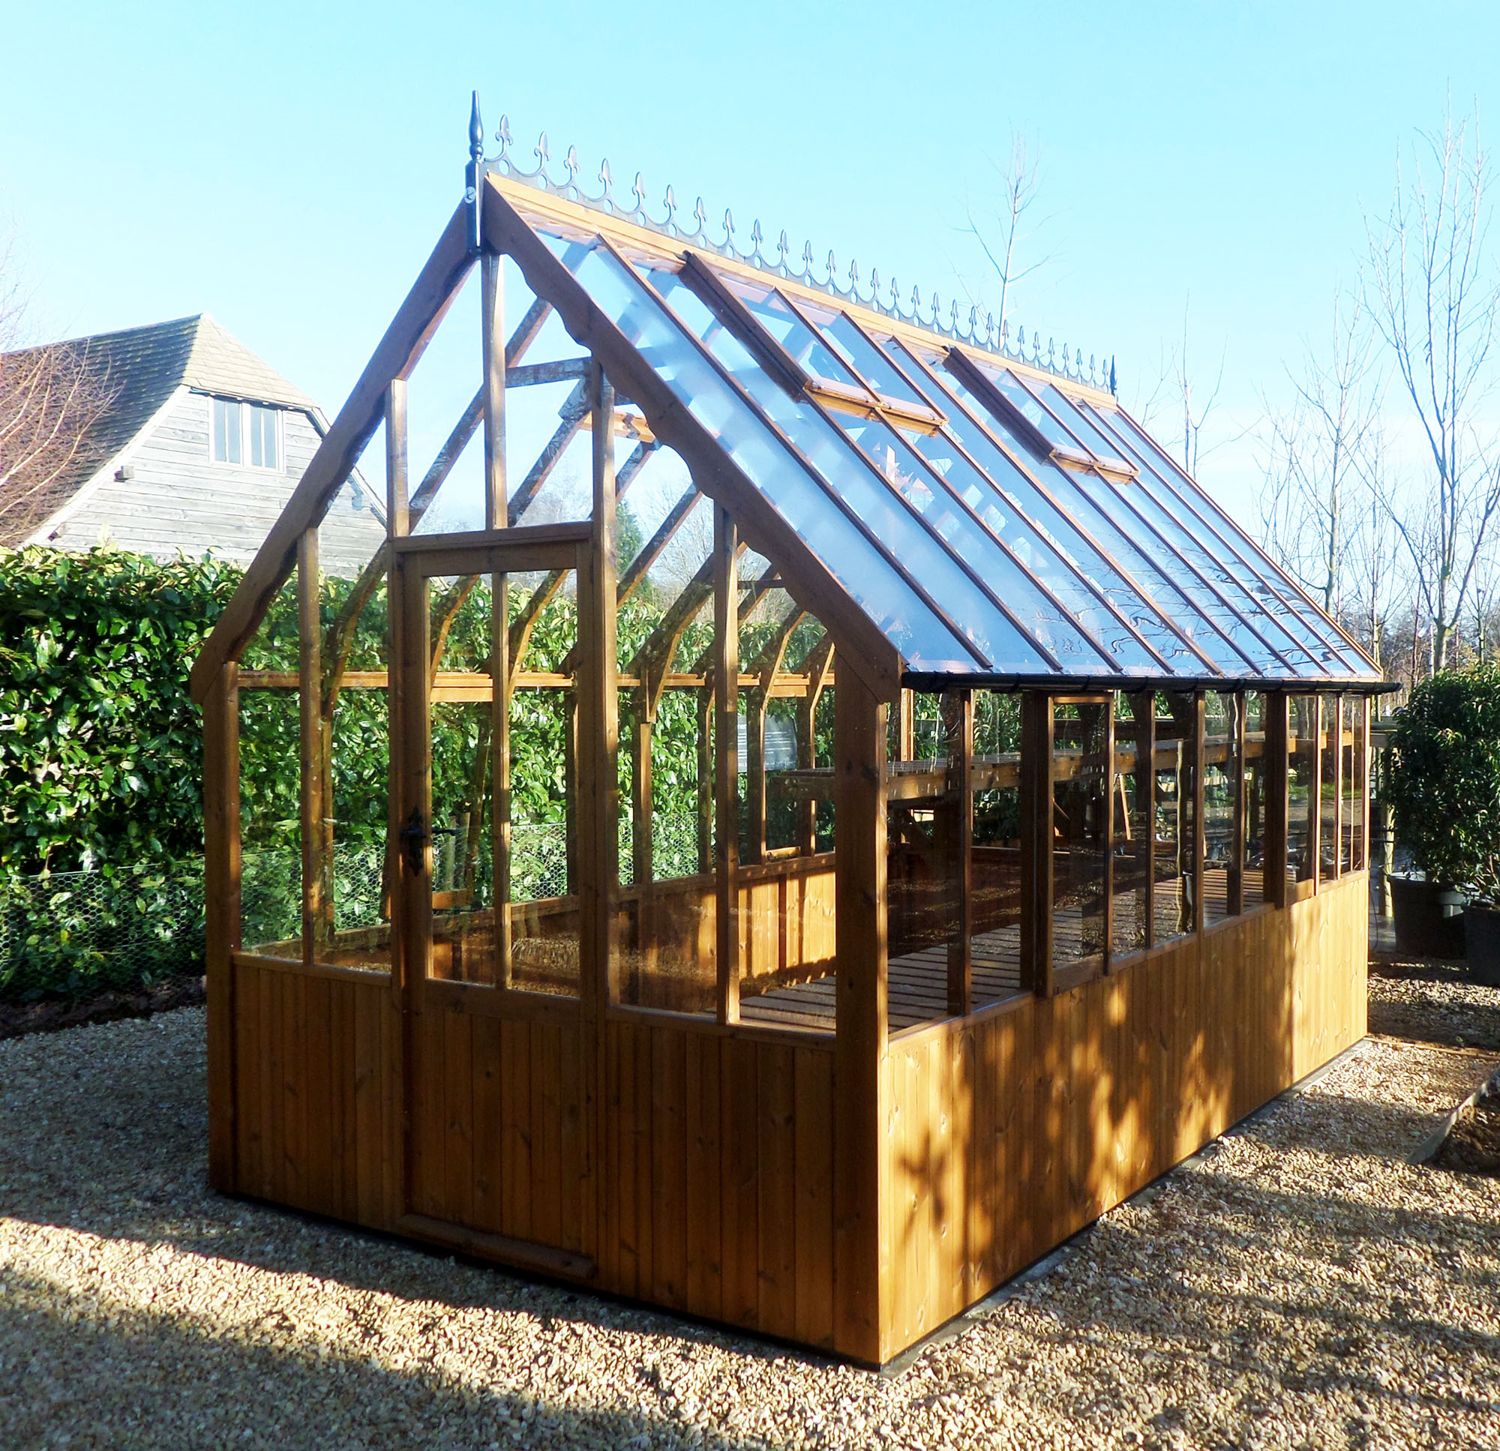 How to Prepare Your Greenhouse for Spring